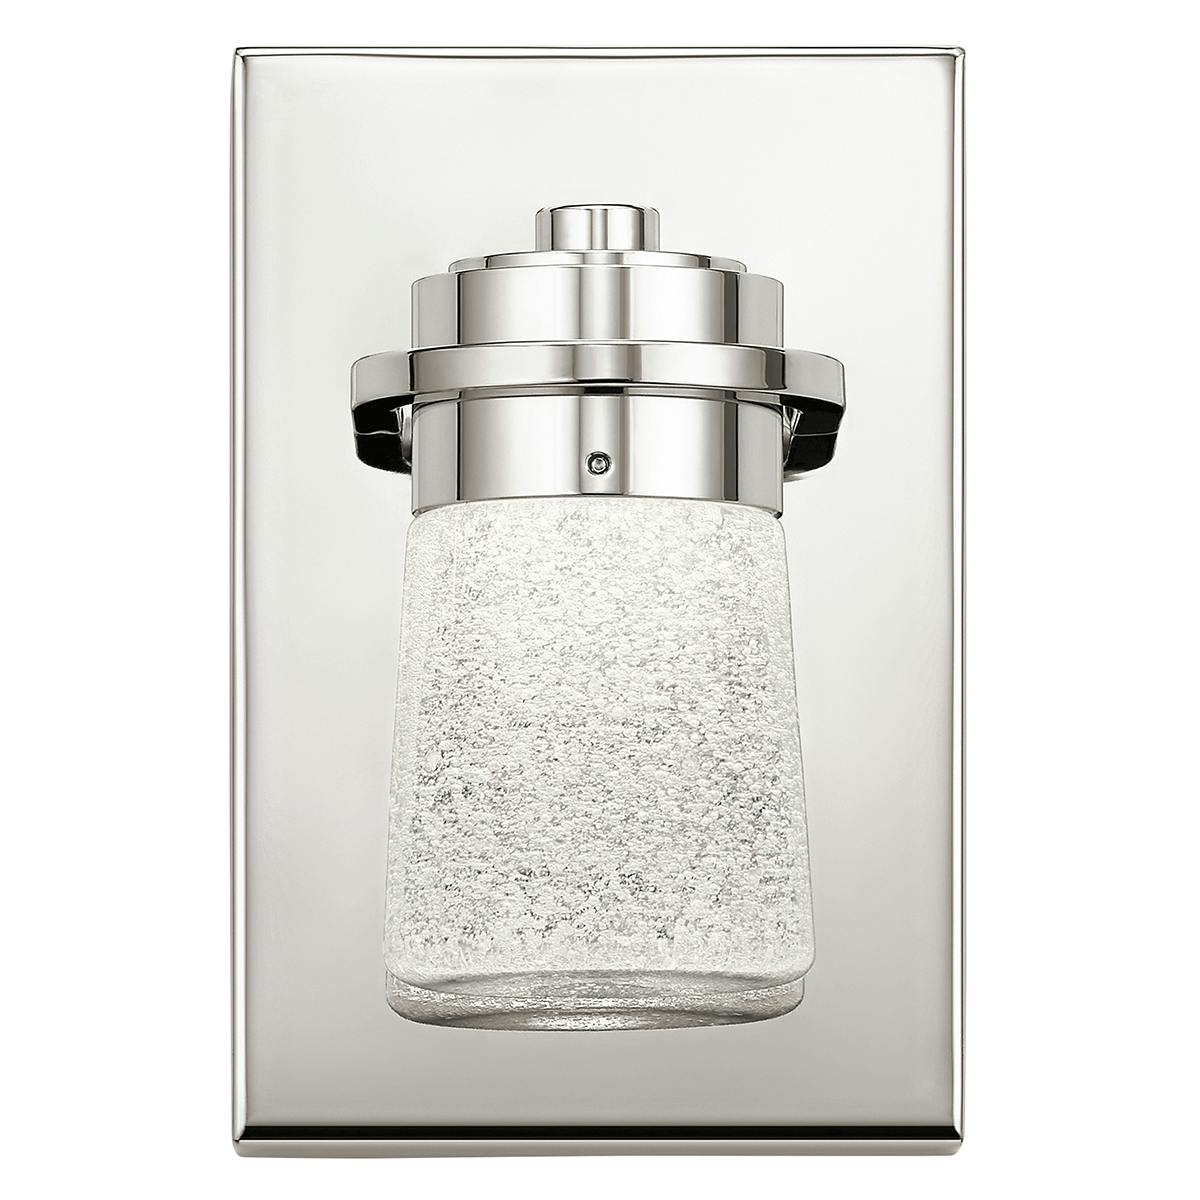 Front view of the Vada 3000K LED 1 Light Sconce Nickel on a white background